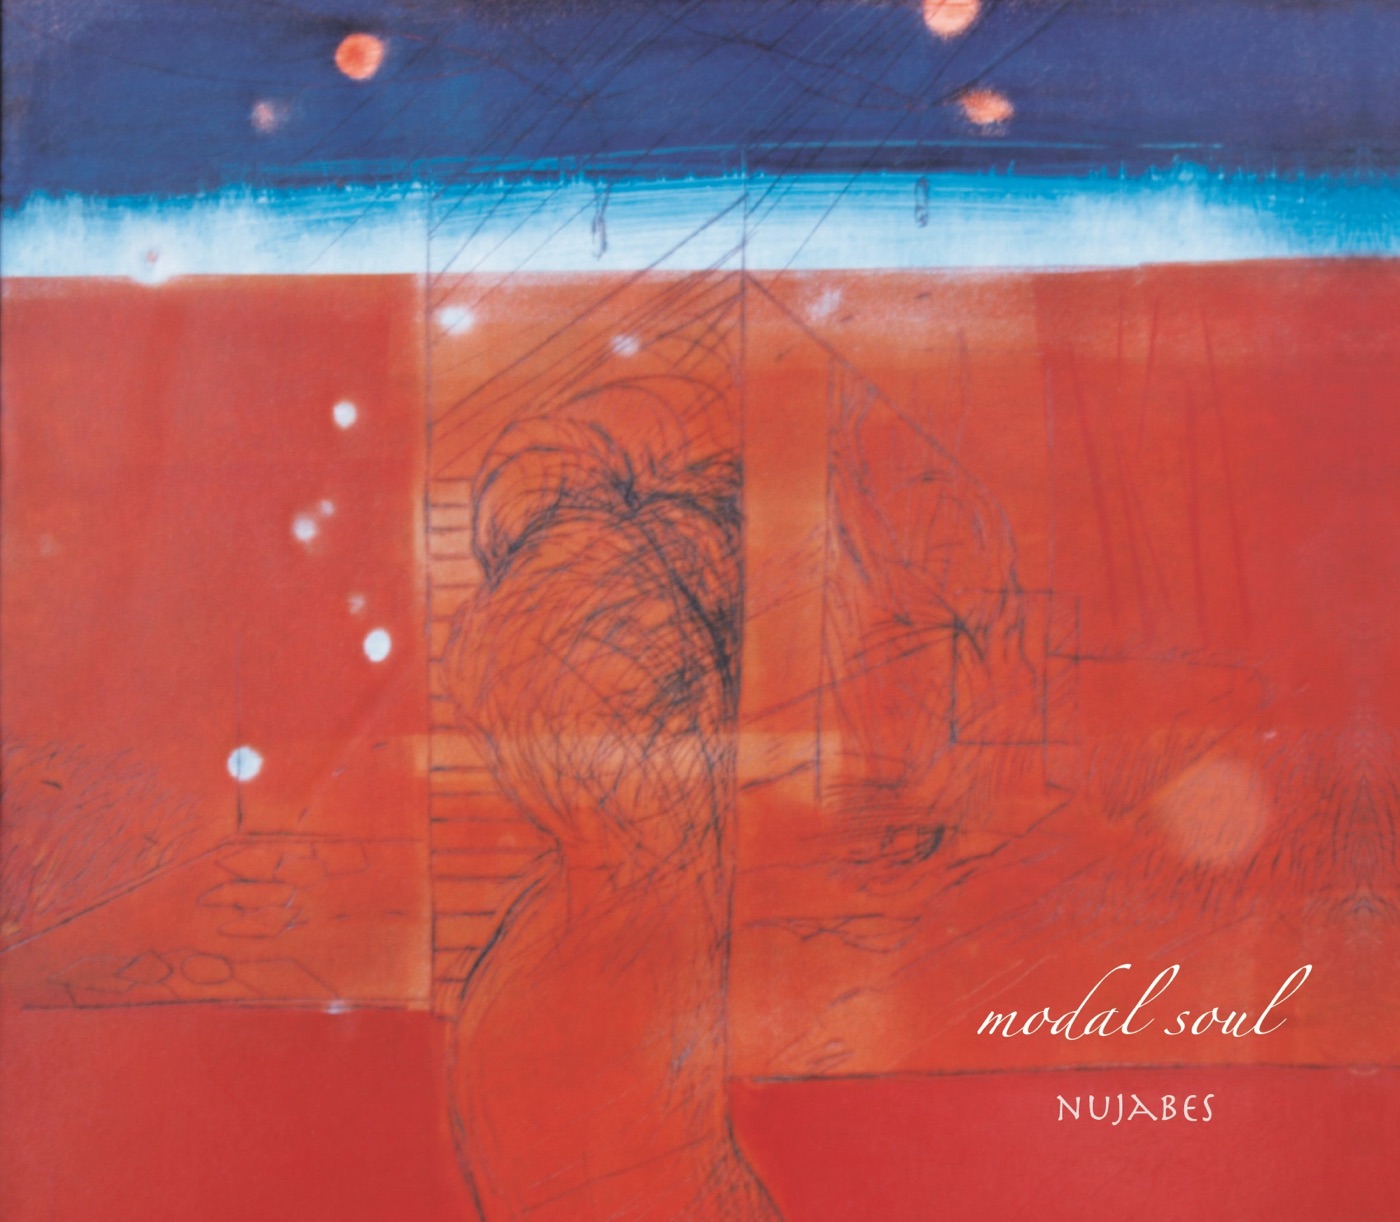 Modal Soul by Nujabes